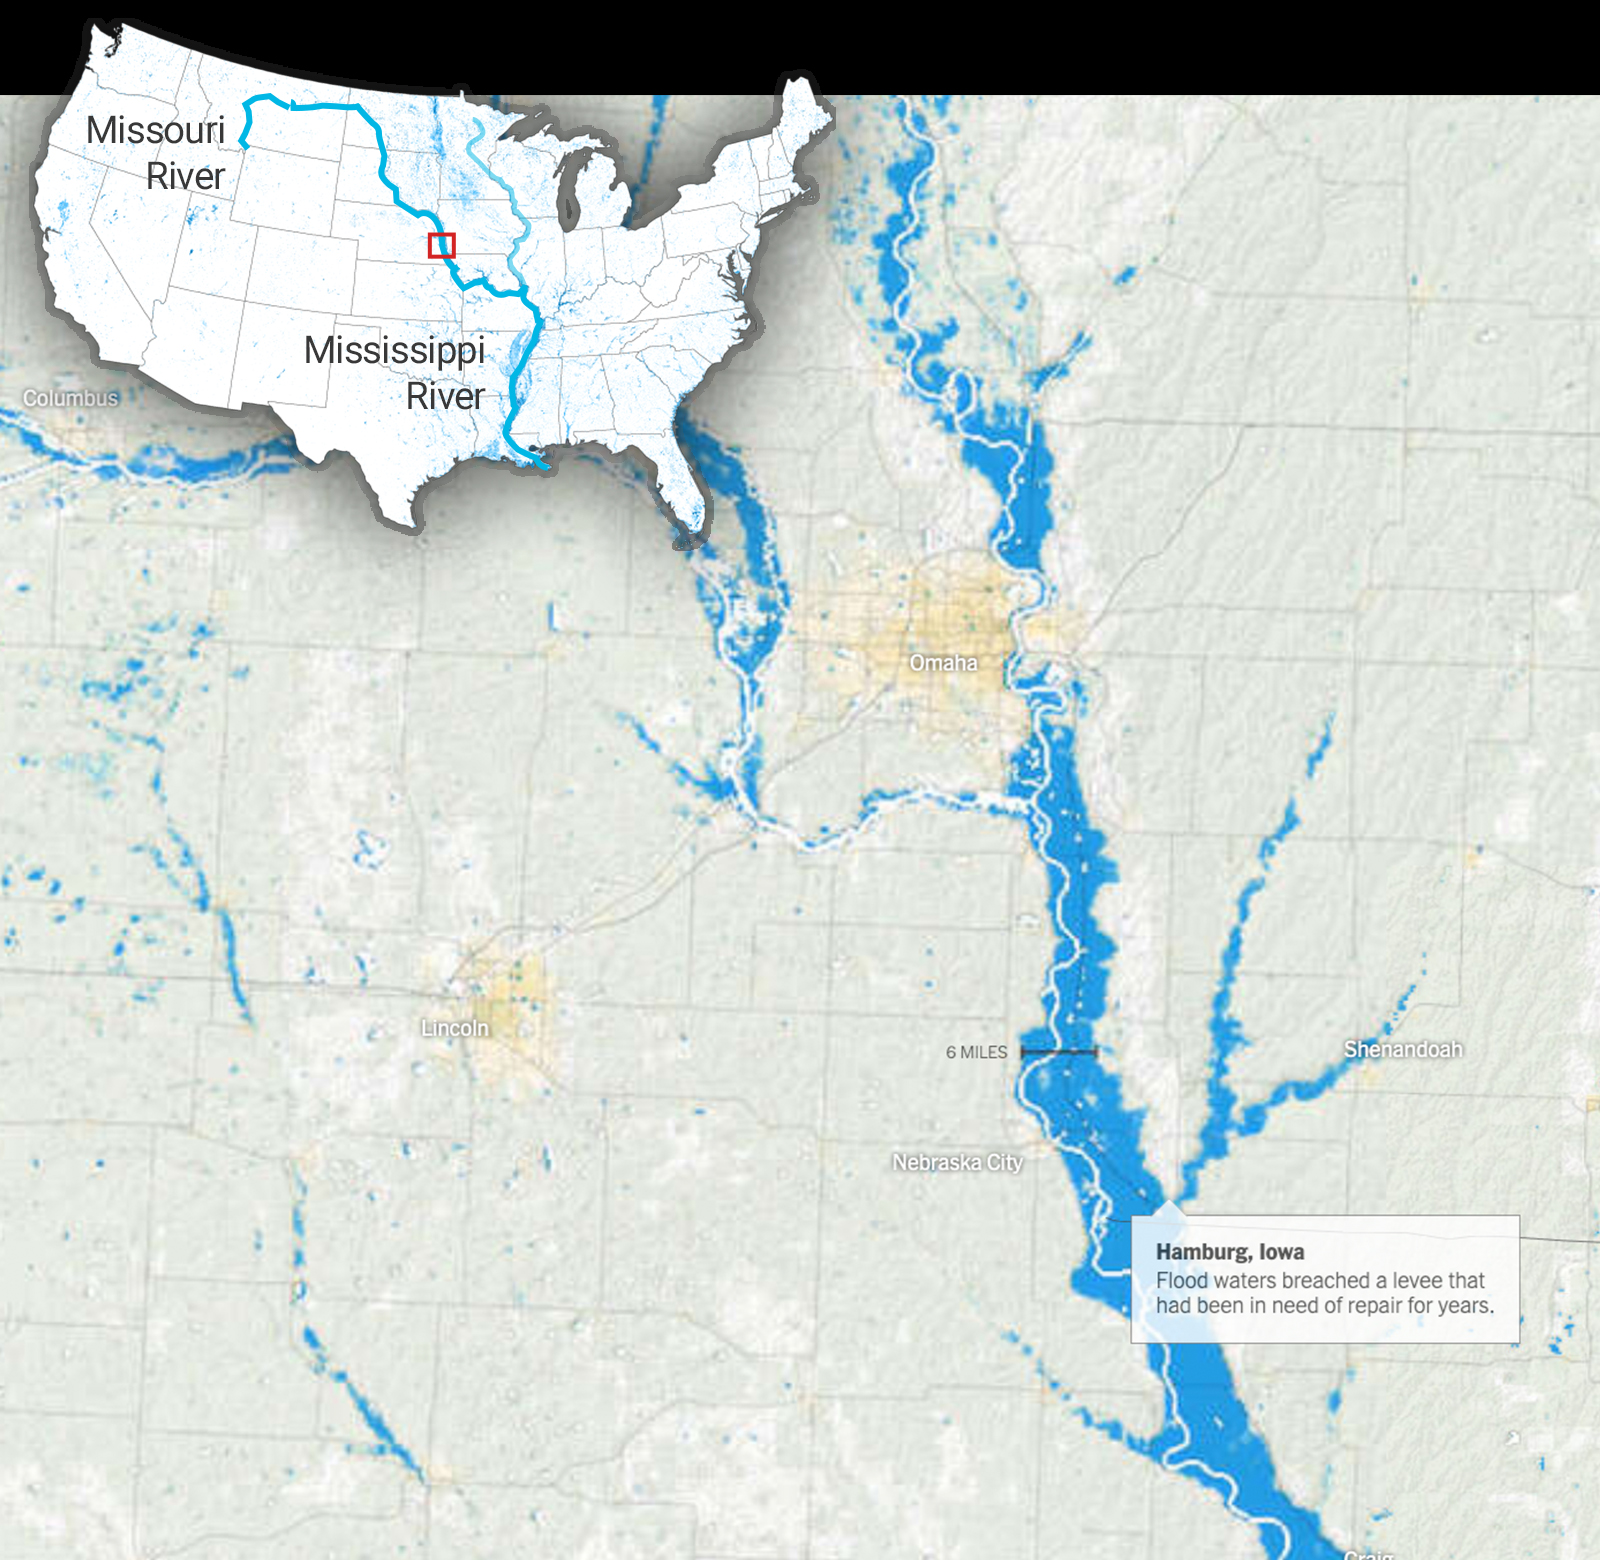 A satellite image of Iowa shows floodwaters in bright blue. A small box toward the middle of the map indicates the location of Hamburg, Iowa, which was particularly impacted by the flood. In the upper left corner, a map of the U.S. shows the part of the flood area depicted in this image.